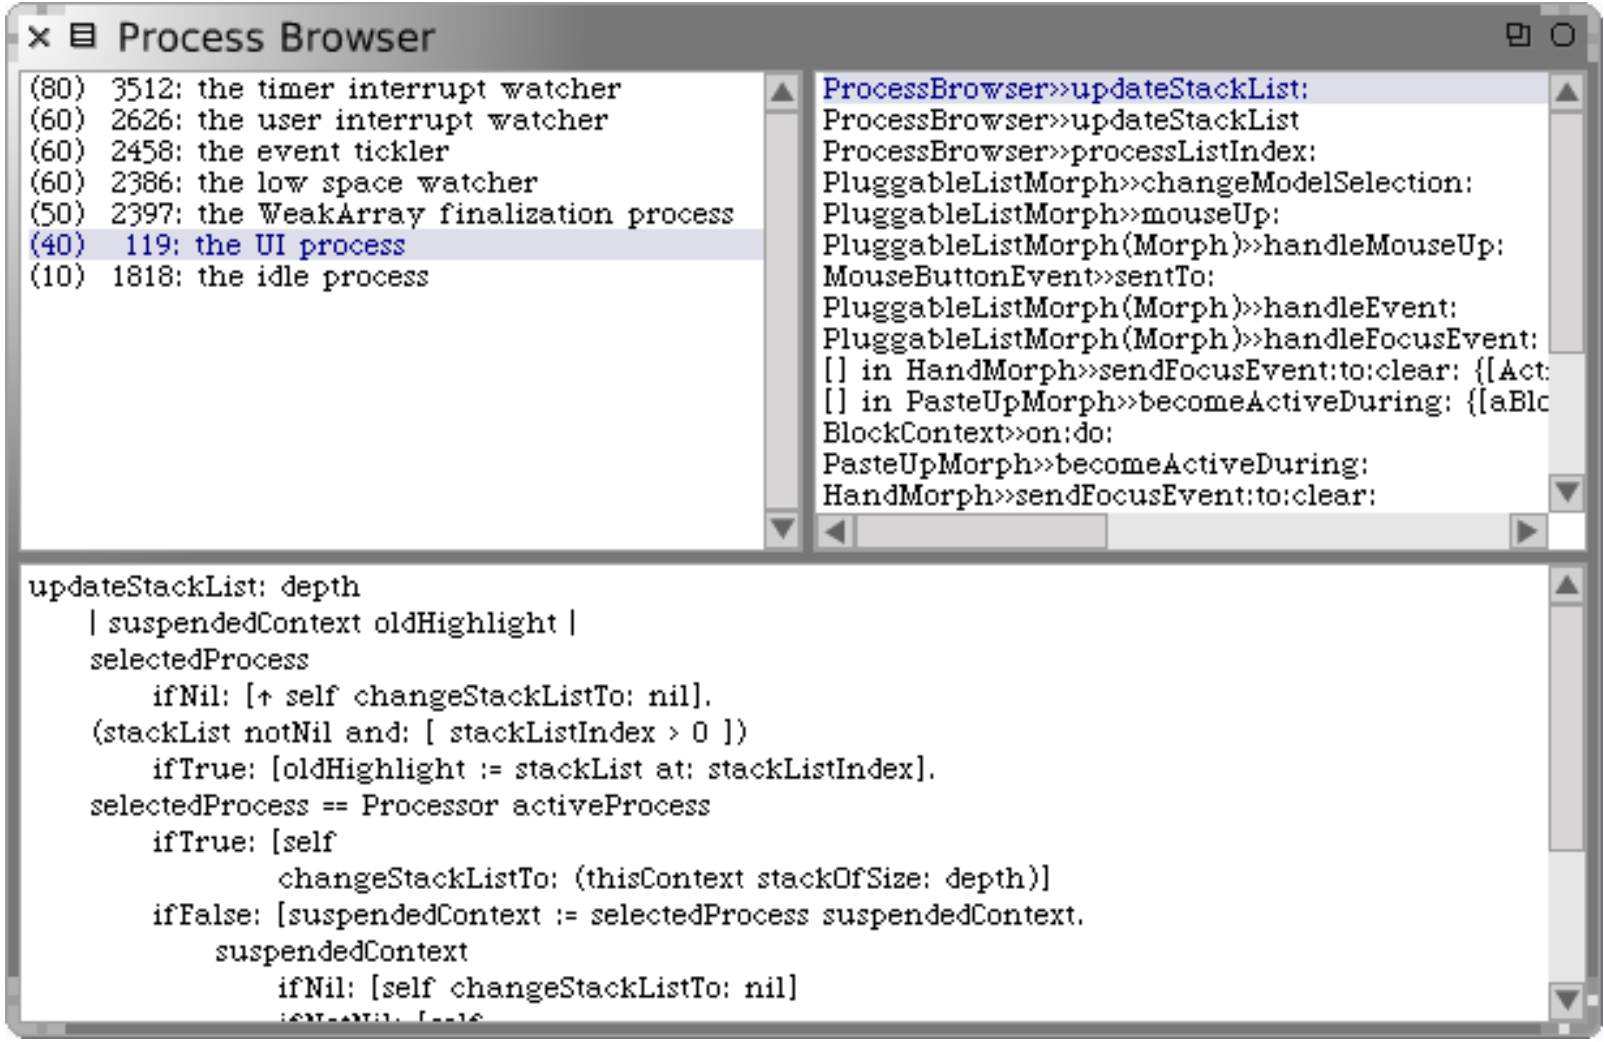 The Process Browser.